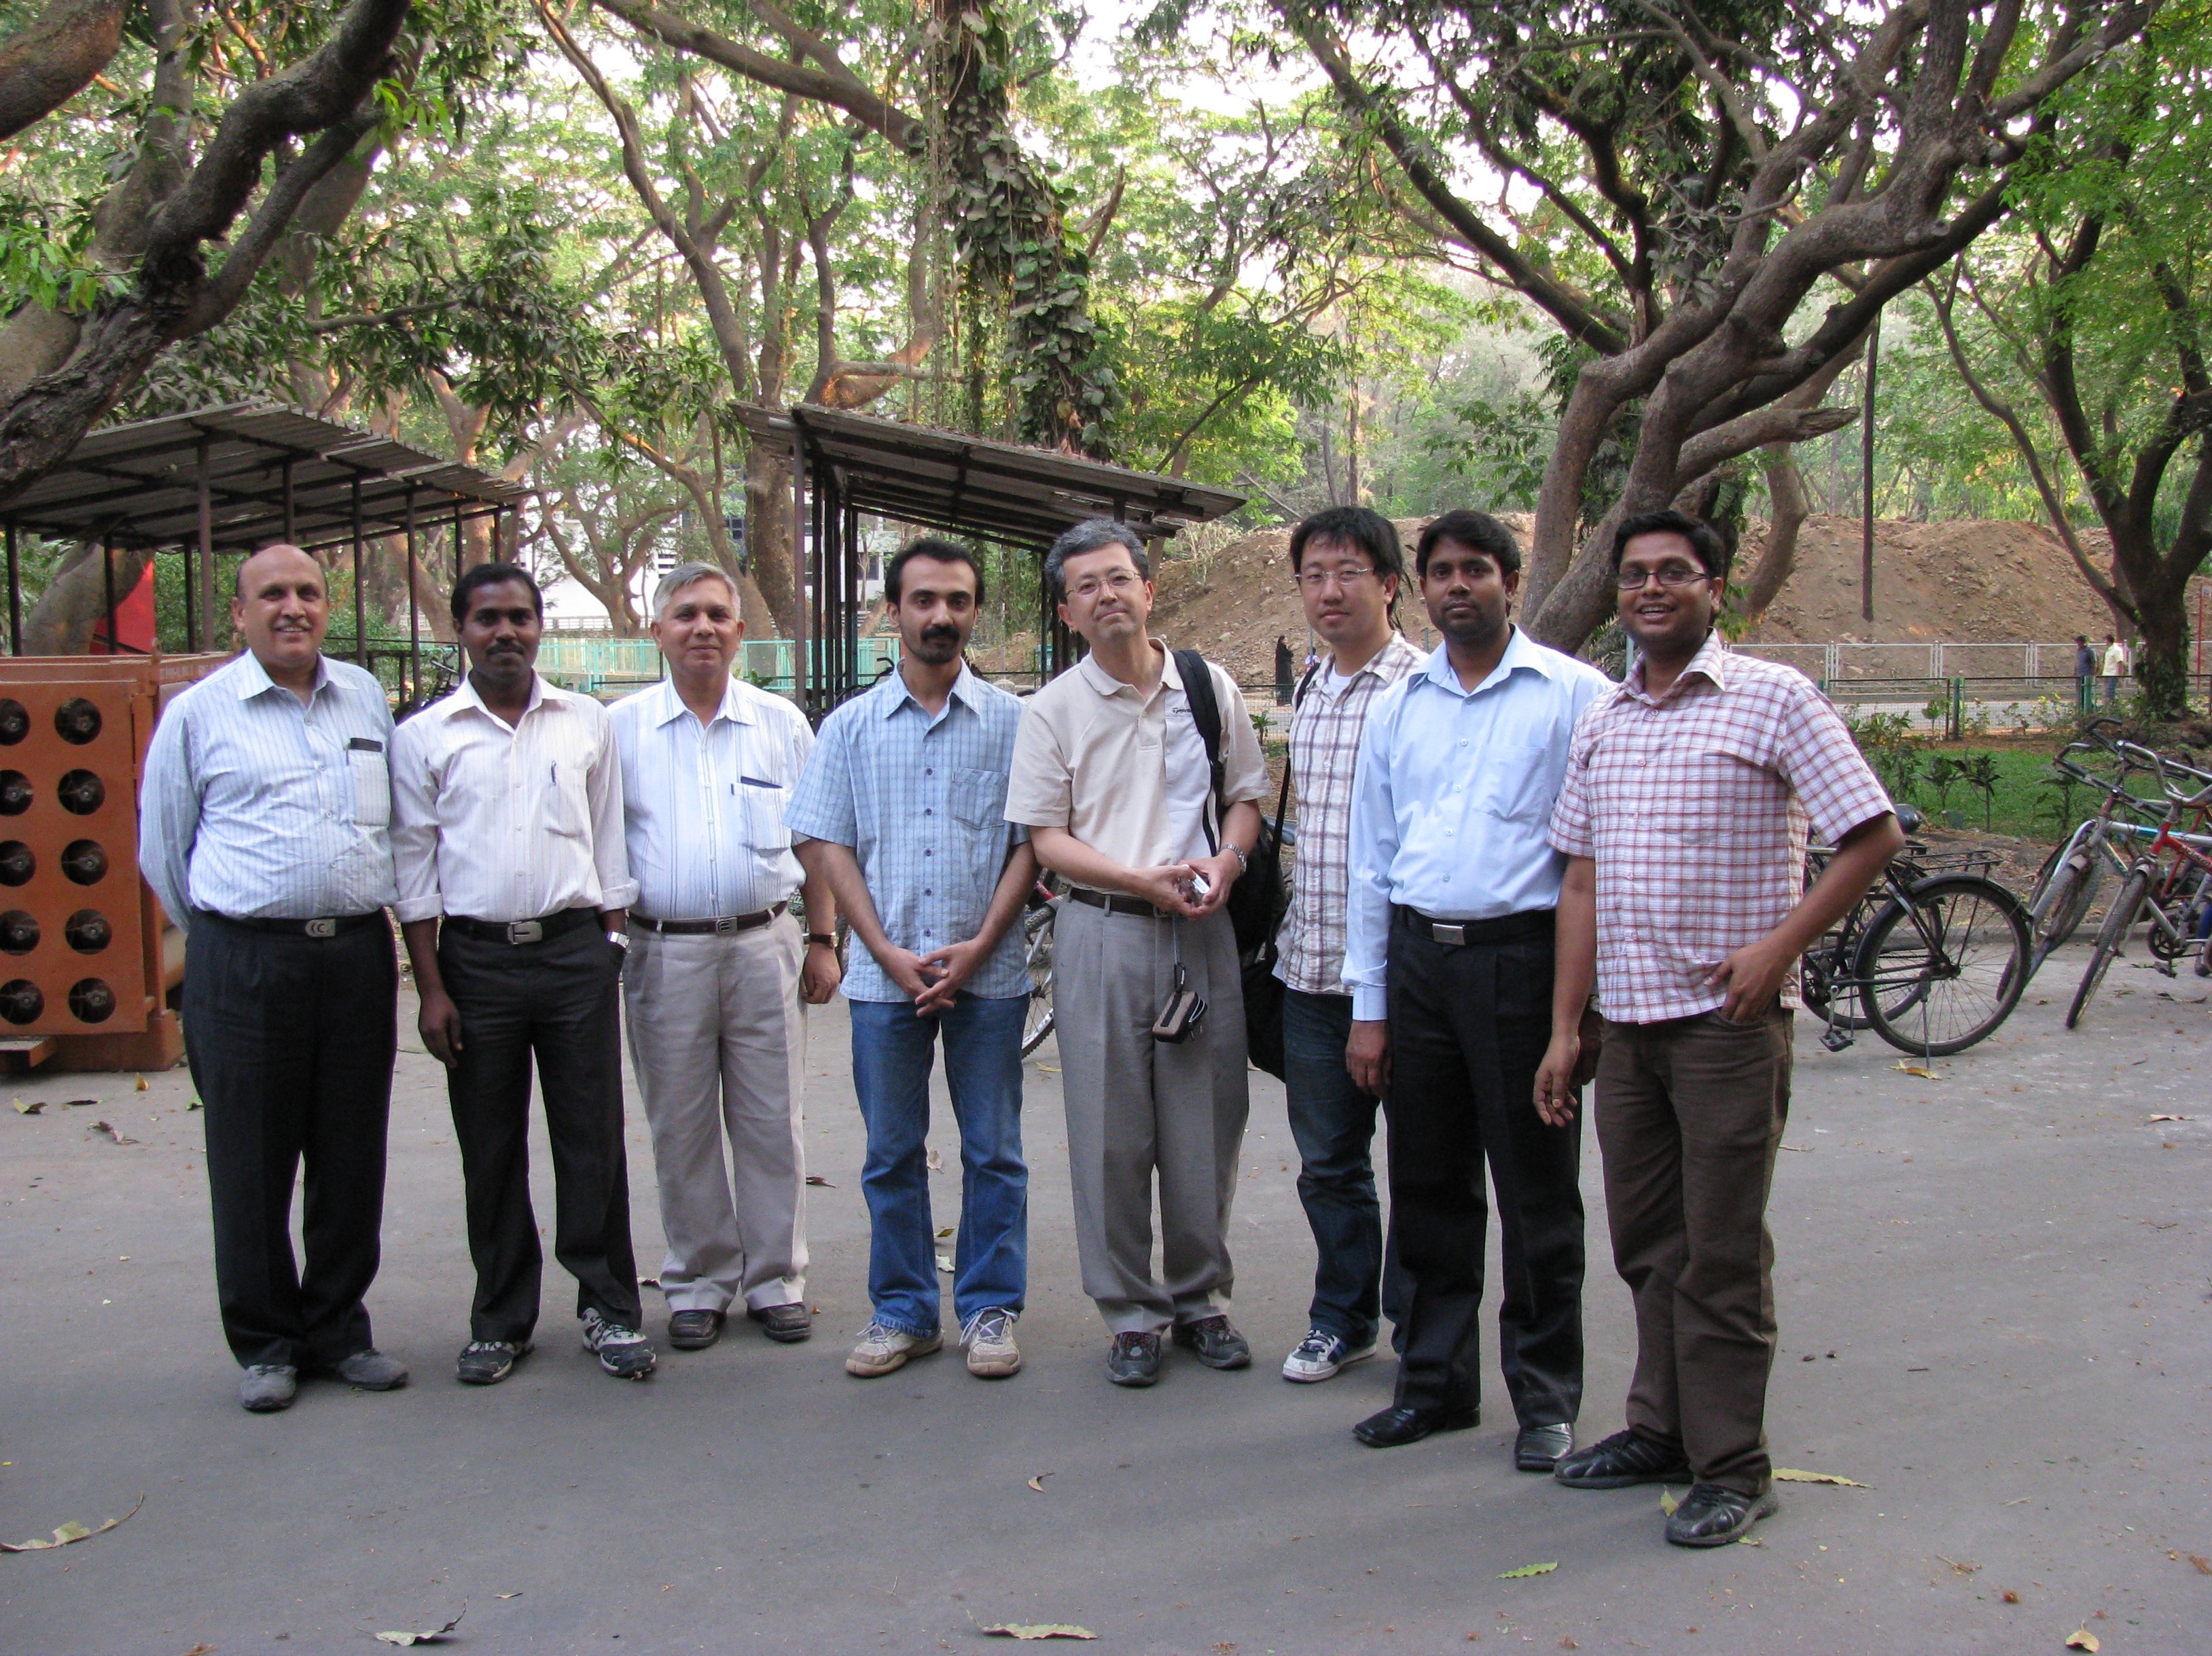 Prof Iwaoka, Dr Jain and our group 